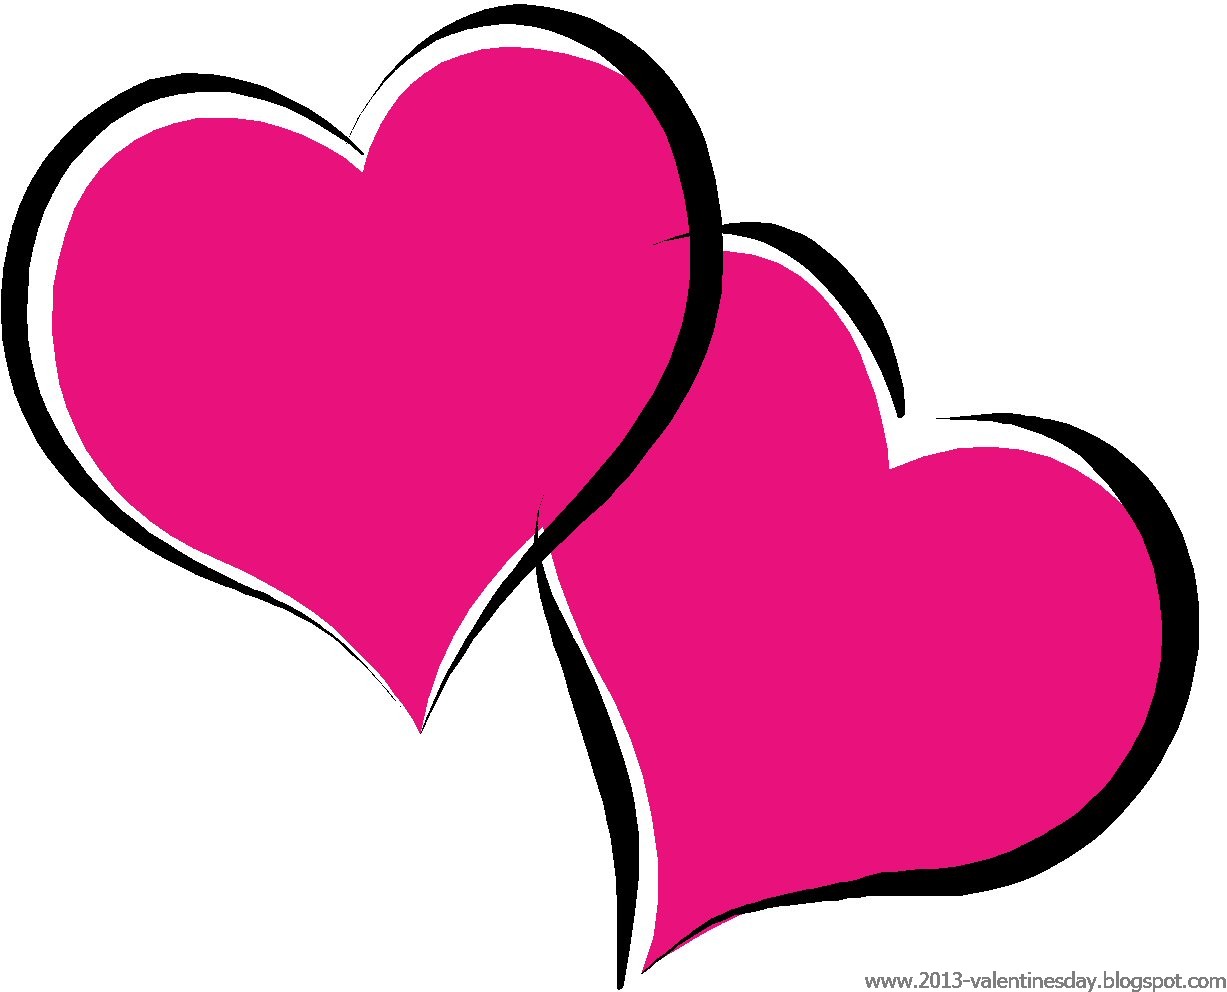 valentines day clipart images - photo #1